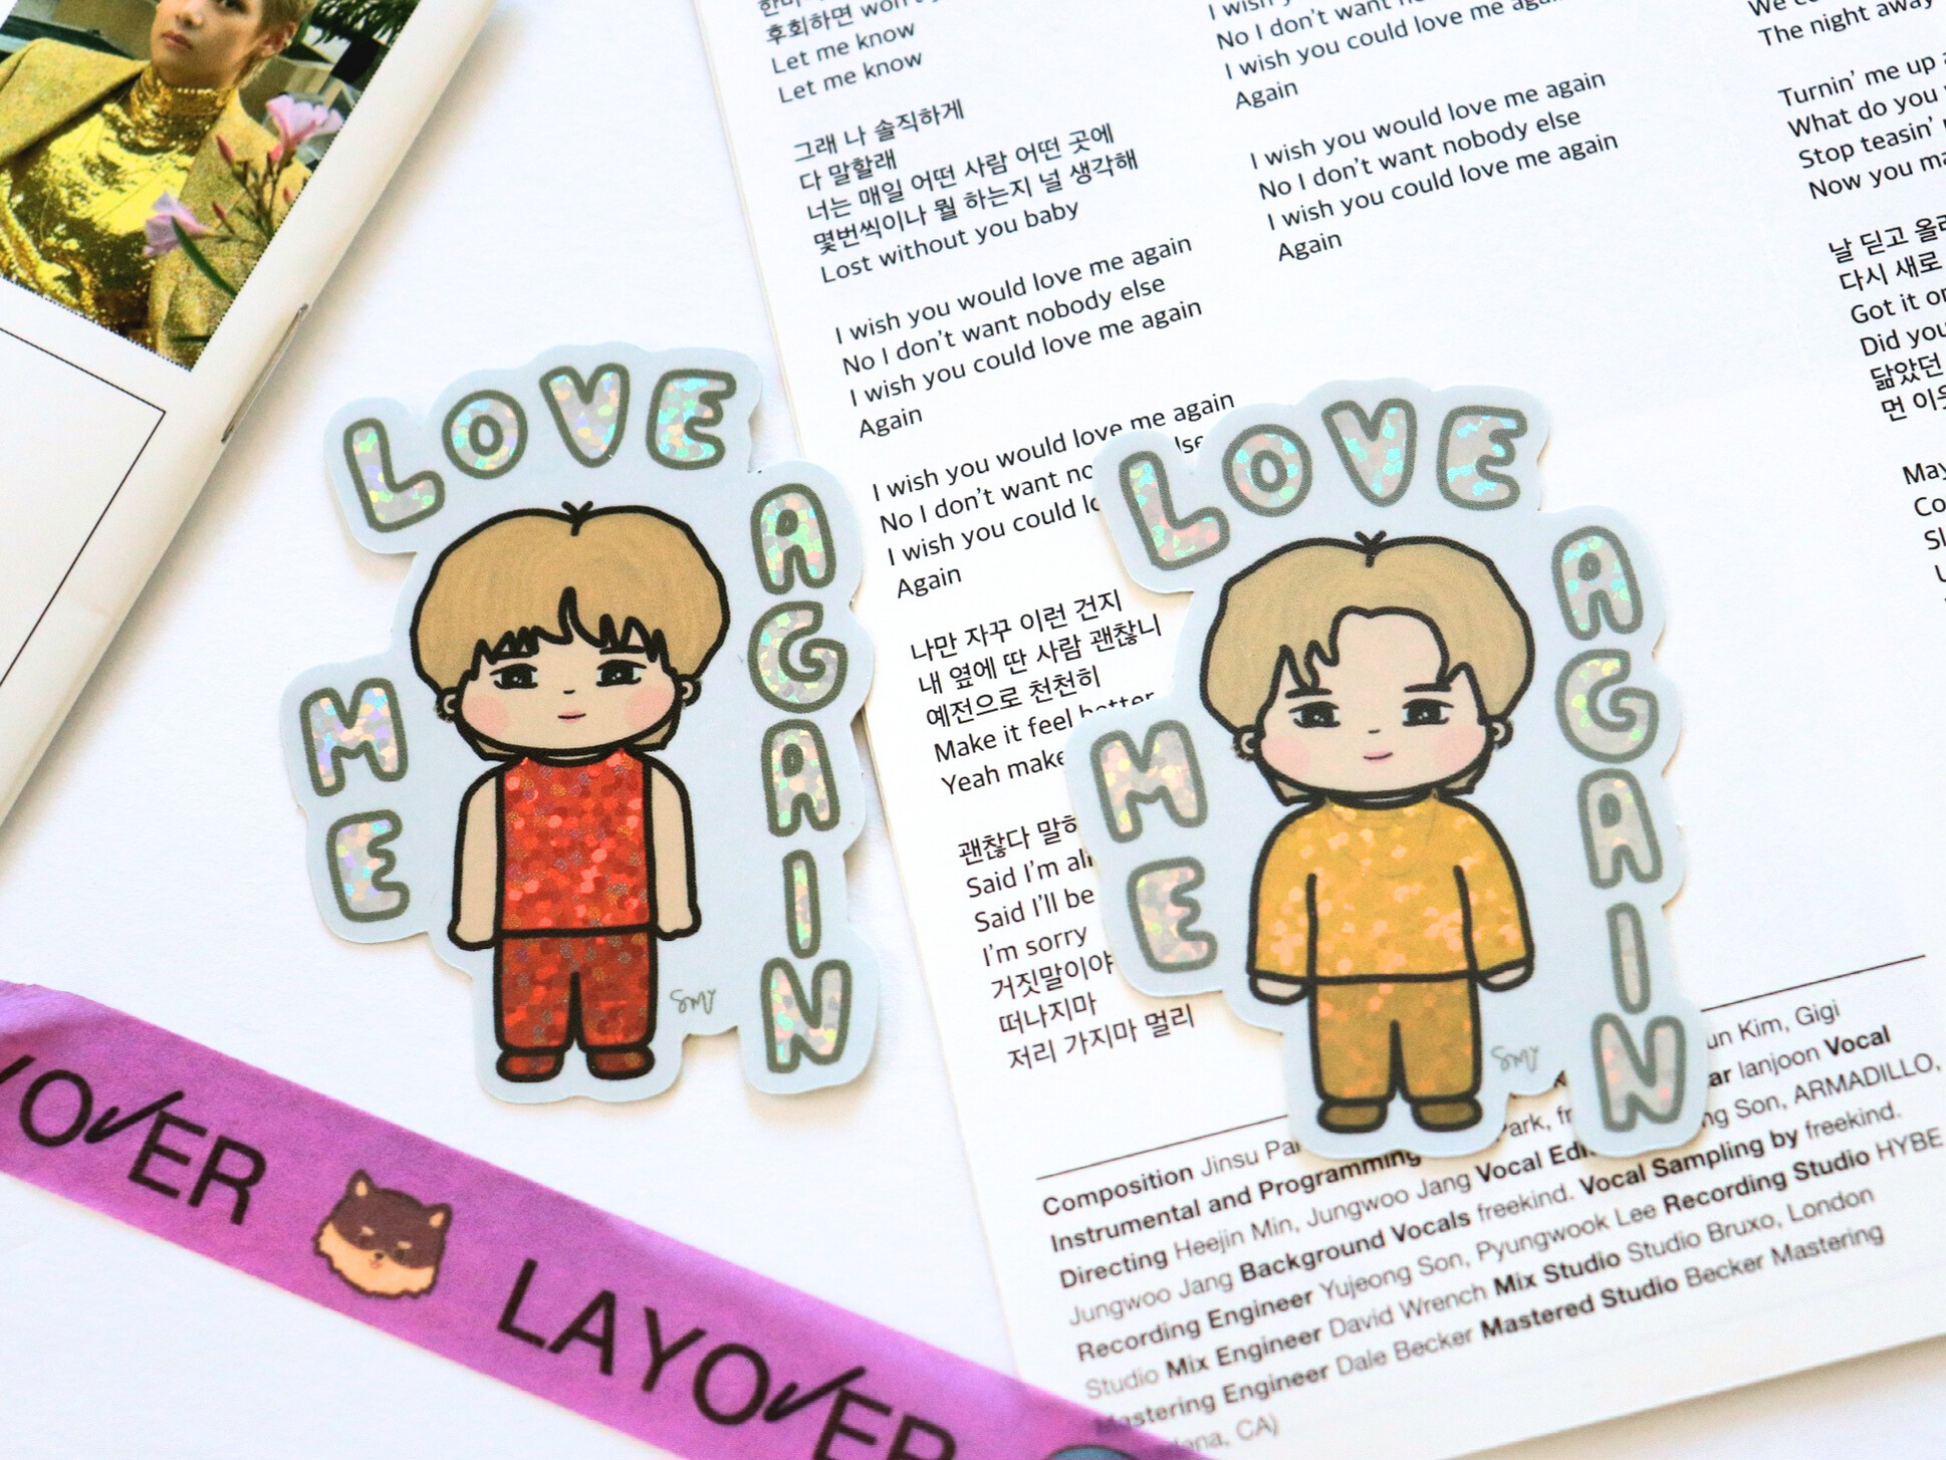 Love in Bloom Stickers